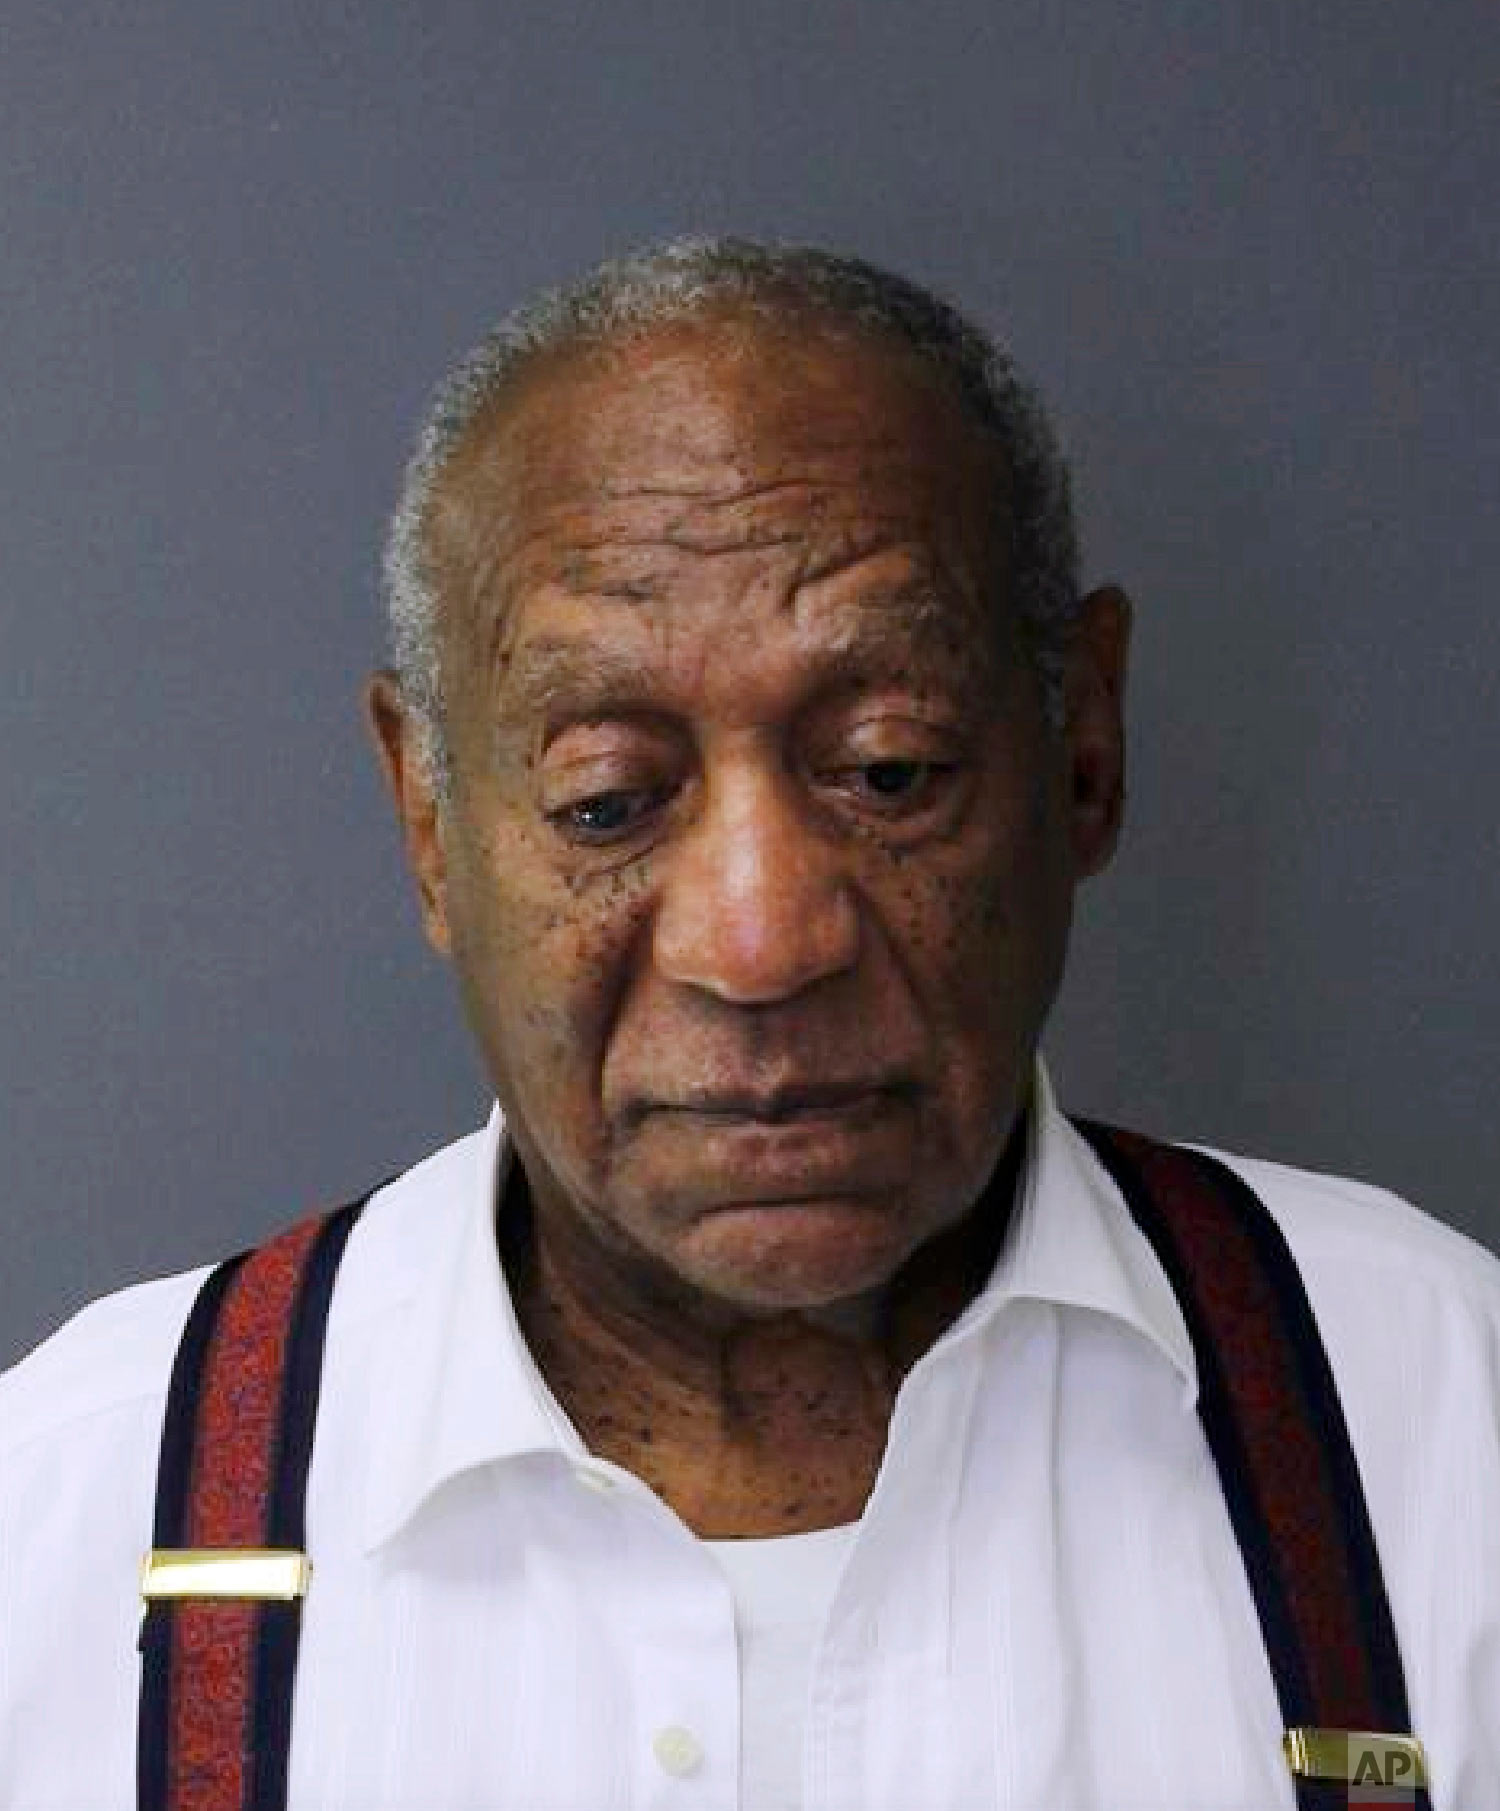  This image provided by the Montgomery County Correctional Facility shows Bill Cosby on Sept. 25, 2018, after he was sentenced to three to 10 years for sexual assault. (Montgomery County Correctional Facility via AP) 